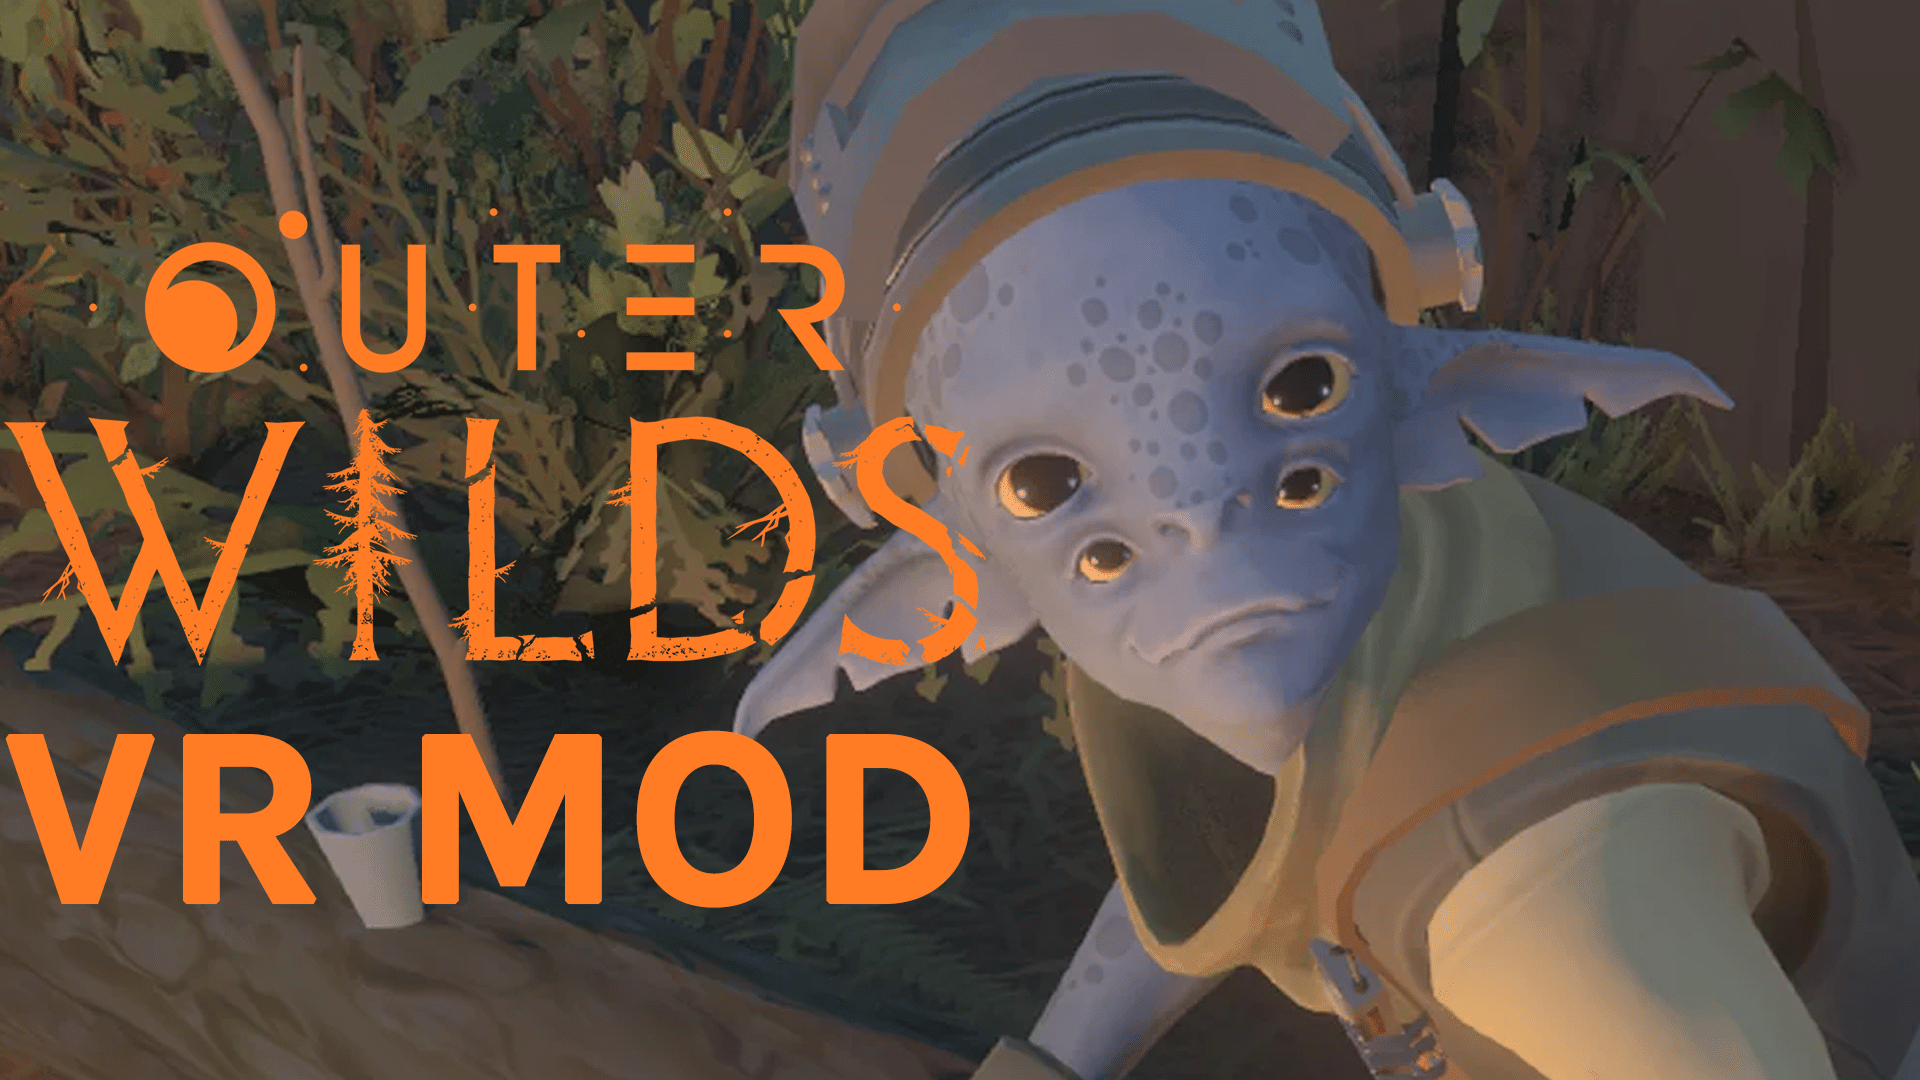 Secret Words - A mod that creates 5 custom planets on Outer Wilds